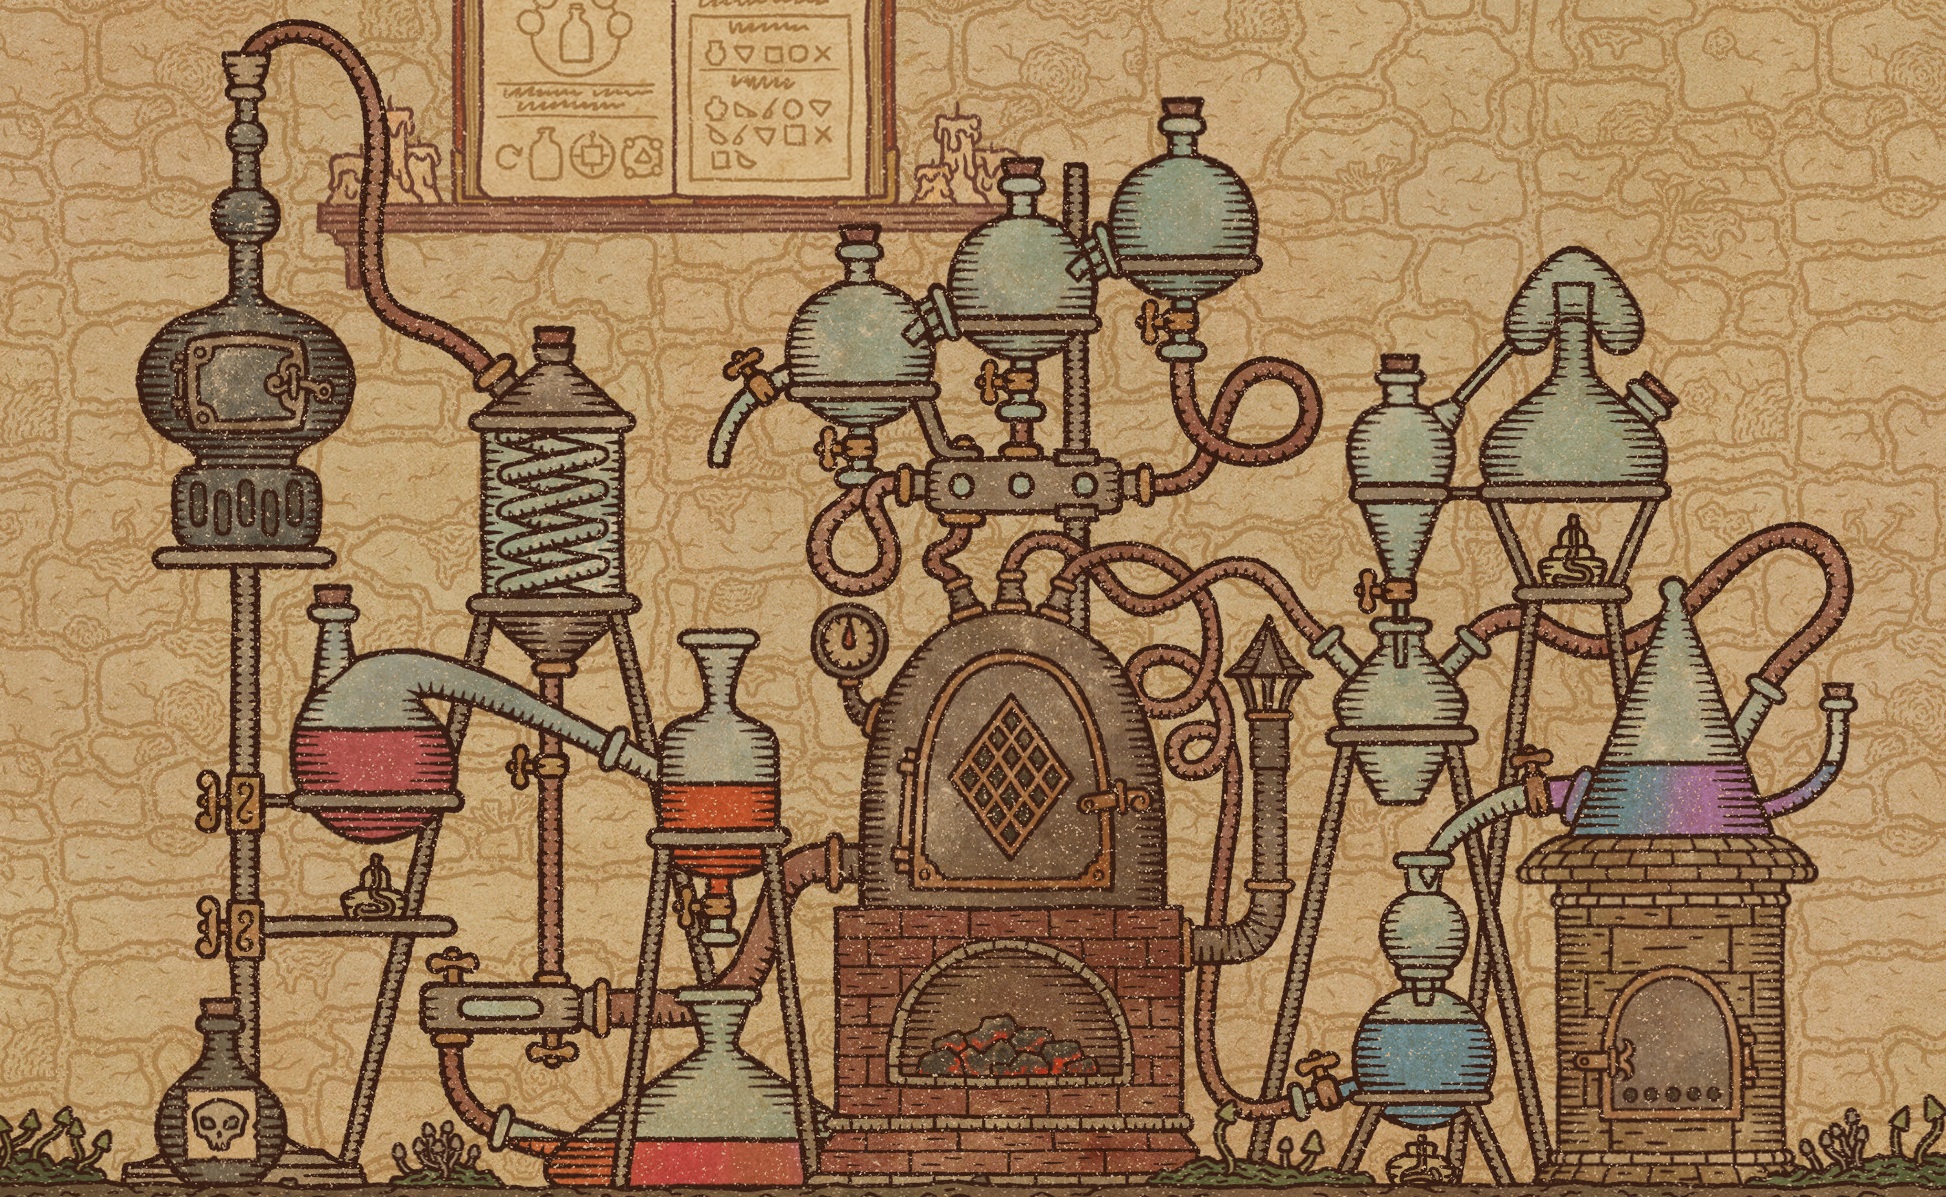  Grind the herbs yourself in alchemy simulator Potion Craft 